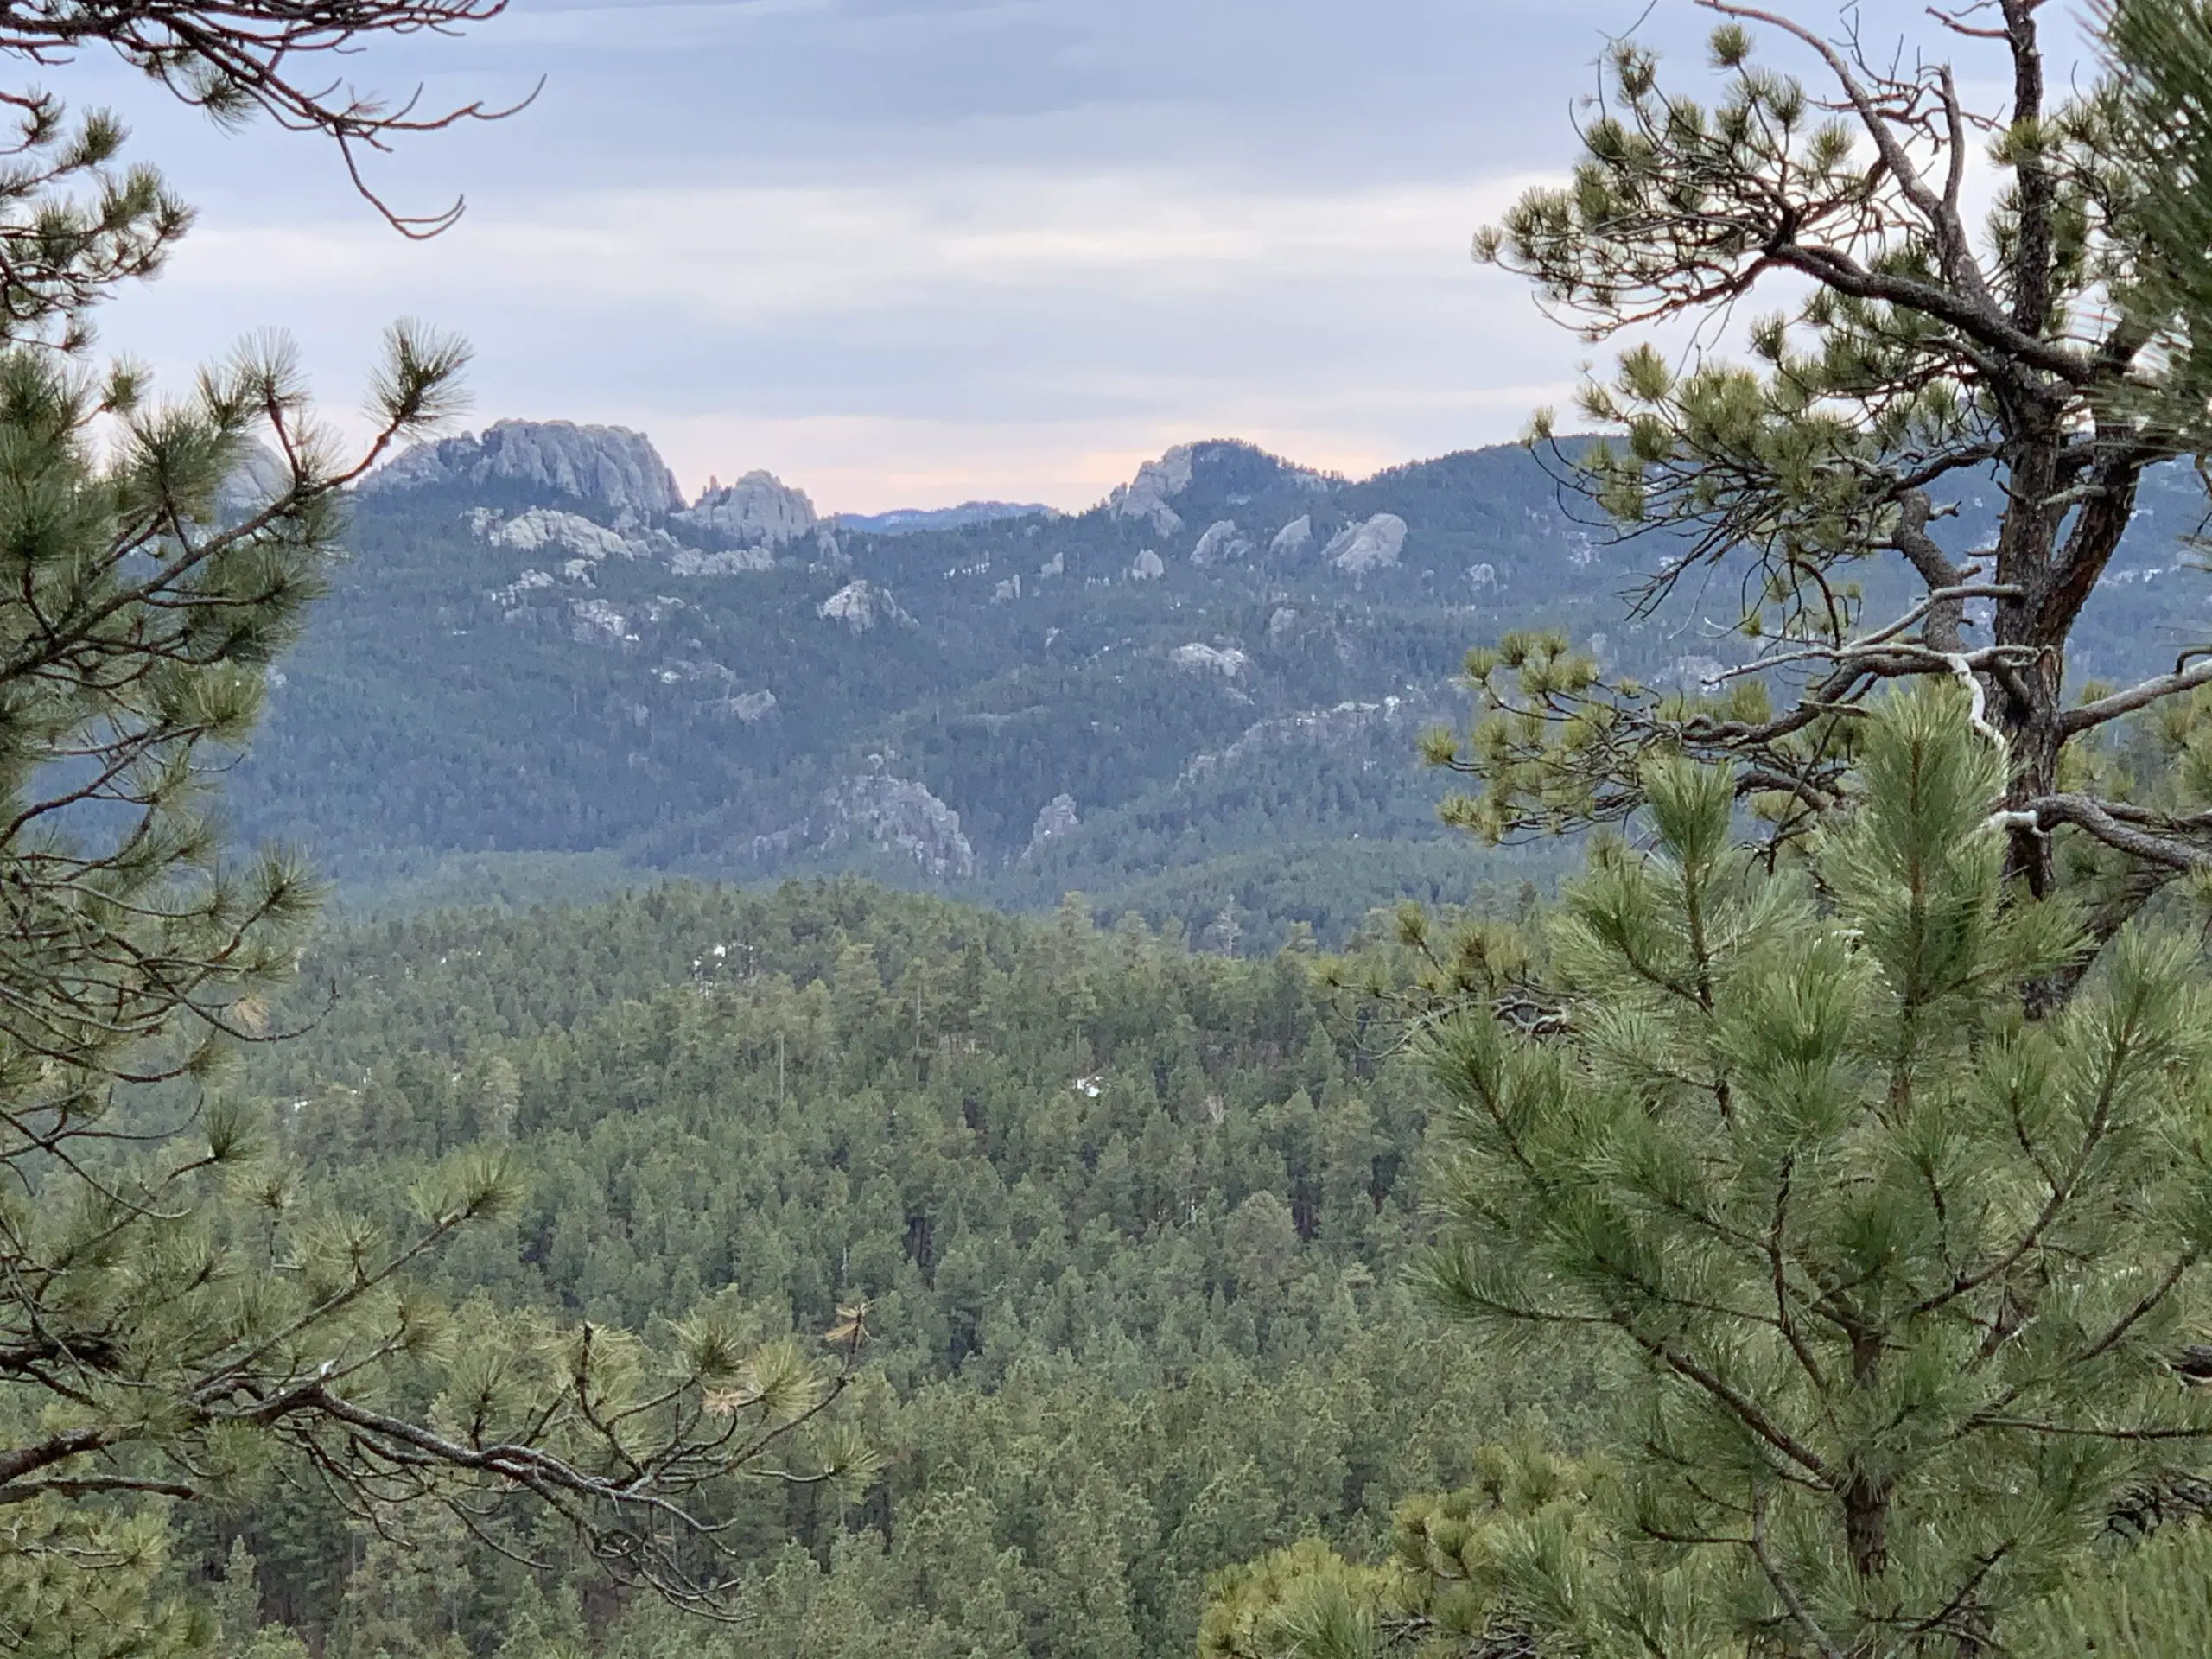 Expansive view over pine trees with tree-covered, rocky mountains rising in the background.